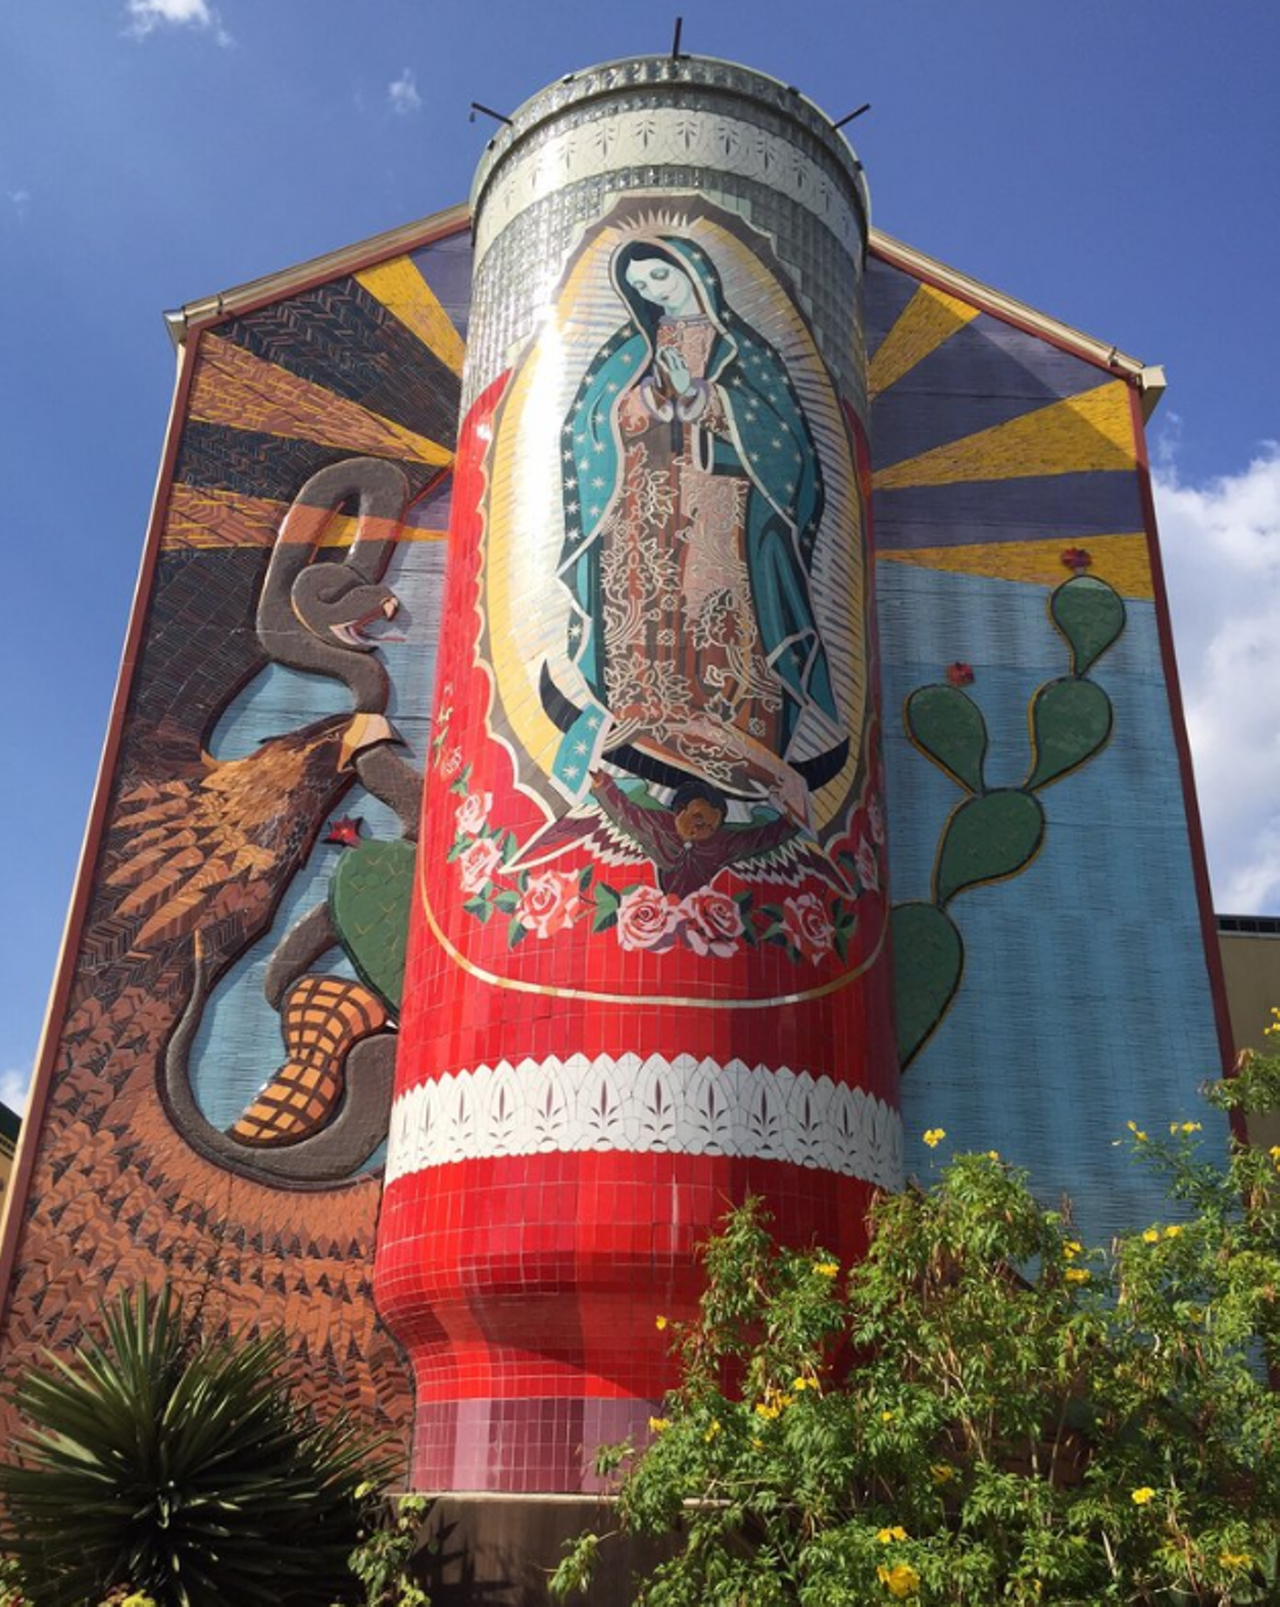 La Veladora of Our Lady of Guadalupe
1315 Guadalupe St.
Artist: Jesse Trevino, 2006
This spectacular mural features a 3D votive candle (veladora) with an eternal flame facing Guadalupe Street. Intended to serve as a beacon for the neighborhood, this mixed media mural is truly magnificent. 
Yelp/Guadalupe Cultural Arts Center